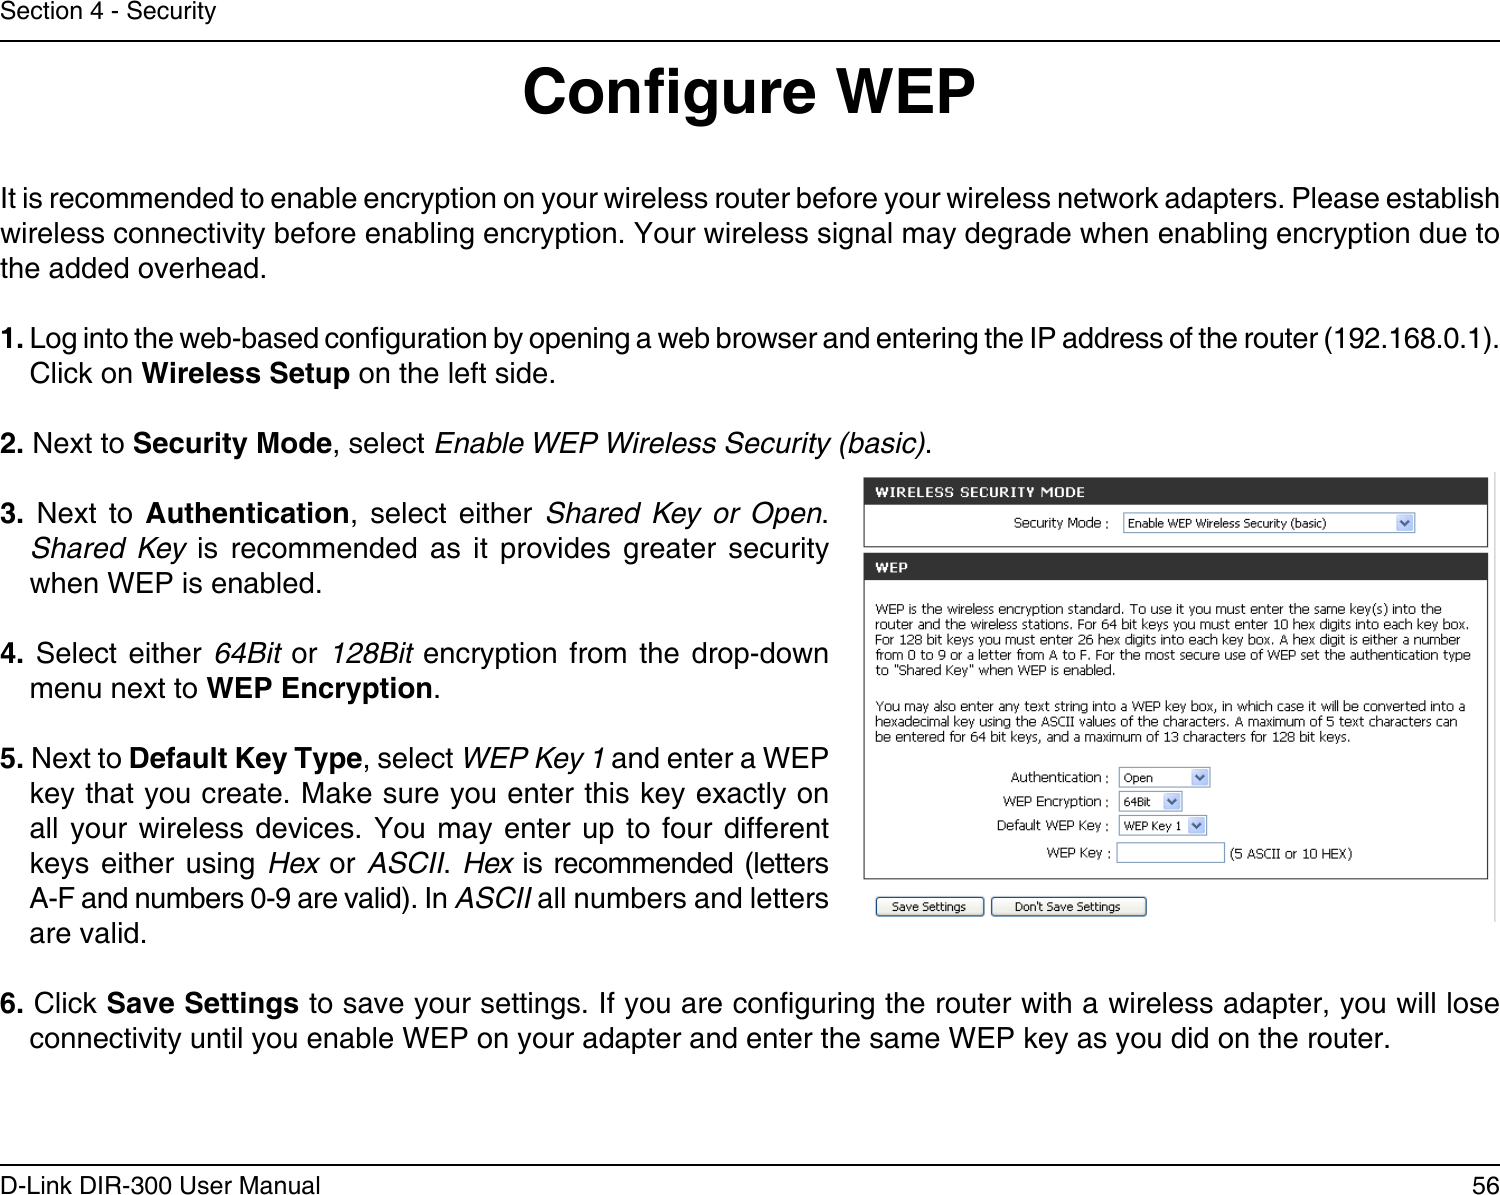 56D-Link DIR-300 User ManualSection 4 - SecurityCongure WEPIt is recommended to enable encryption on your wireless router before your wireless network adapters. Please establish wireless connectivity before enabling encryption. Your wireless signal may degrade when enabling encryption due to the added overhead.1. Log into the web-based conguration by opening a web browser and entering the IP address of the router (192.168.0.1).  Click on Wireless Setup on the left side.2. Next to Security Mode, select Enable WEP Wireless Security (basic).3.  Next  to  Authentication,  select  either  Shared  Key  or  Open. Shared  Key  is  recommended  as  it  provides  greater  security when WEP is enabled.4.  Select  either  64Bit  or  128Bit  encryption  from  the  drop-down menu next to WEP Encryption. 5. Next to Default Key Type, select WEP Key 1 and enter a WEP key that you create. Make sure you enter this key exactly on all your wireless devices. You may enter  up  to  four  different keys either using Hex  or  ASCII. Hex is recommended (letters A-F and numbers 0-9 are valid). In ASCII all numbers and letters are valid.6. Click Save Settings to save your settings. If you are conguring the router with a wireless adapter, you will lose connectivity until you enable WEP on your adapter and enter the same WEP key as you did on the router.